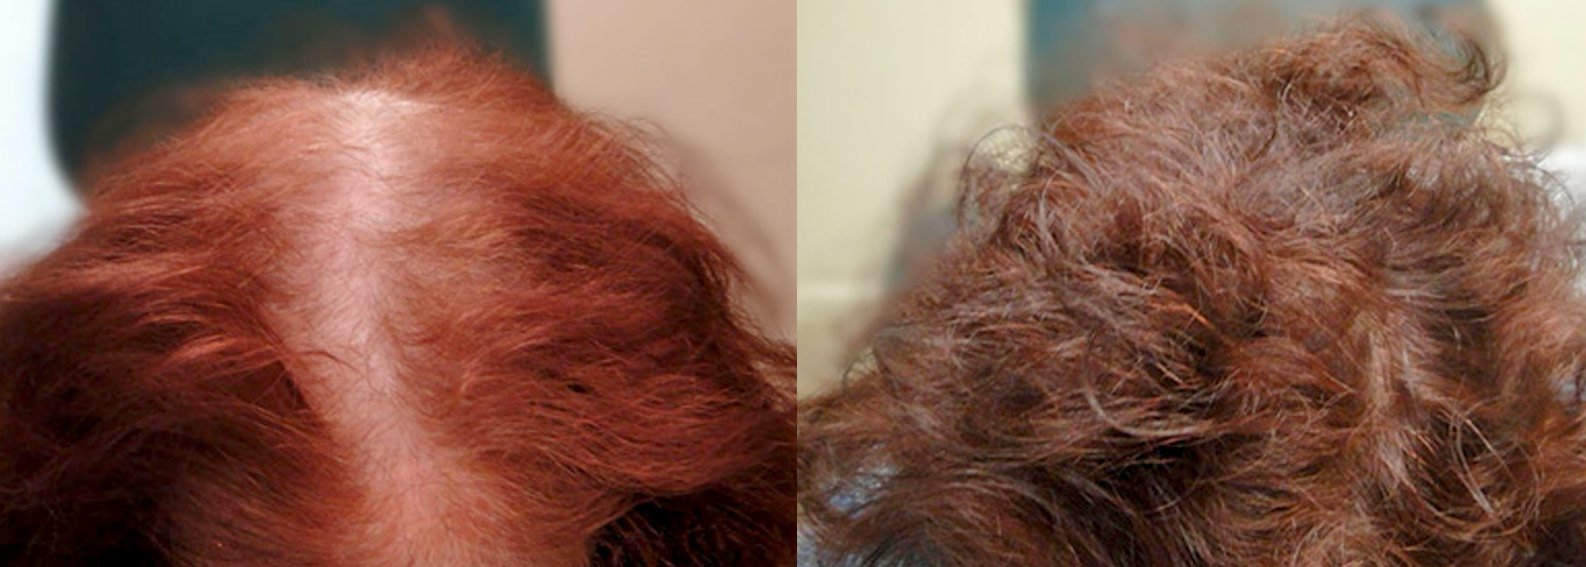 Before & After PRP Hair Restoration Treatment